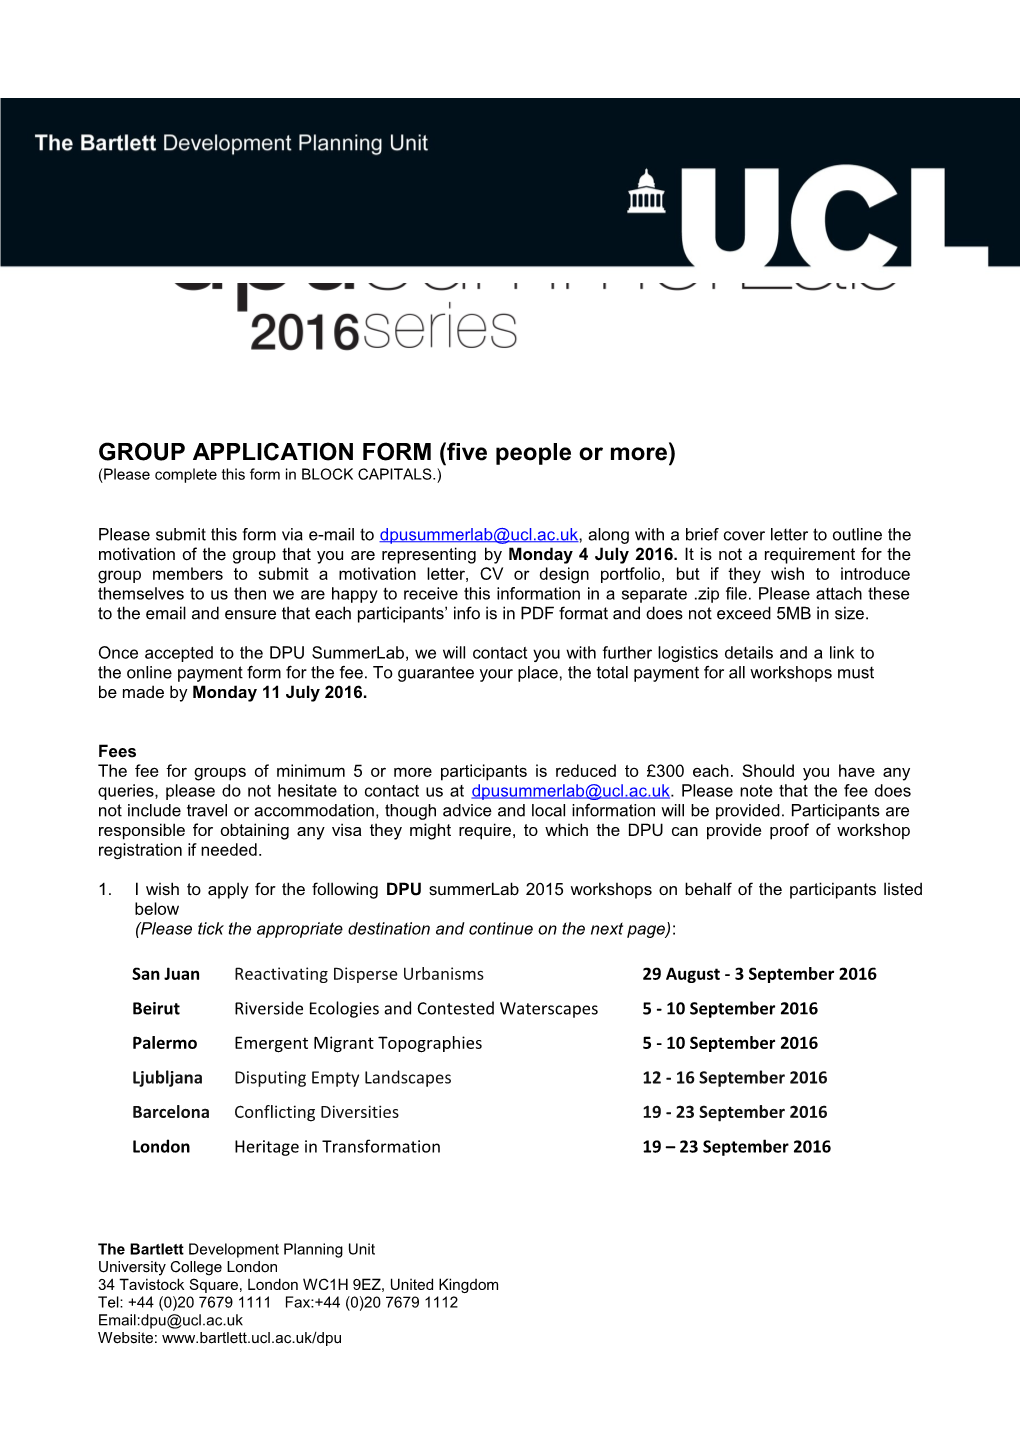 GROUP APPLICATION FORM (Five People Or More)